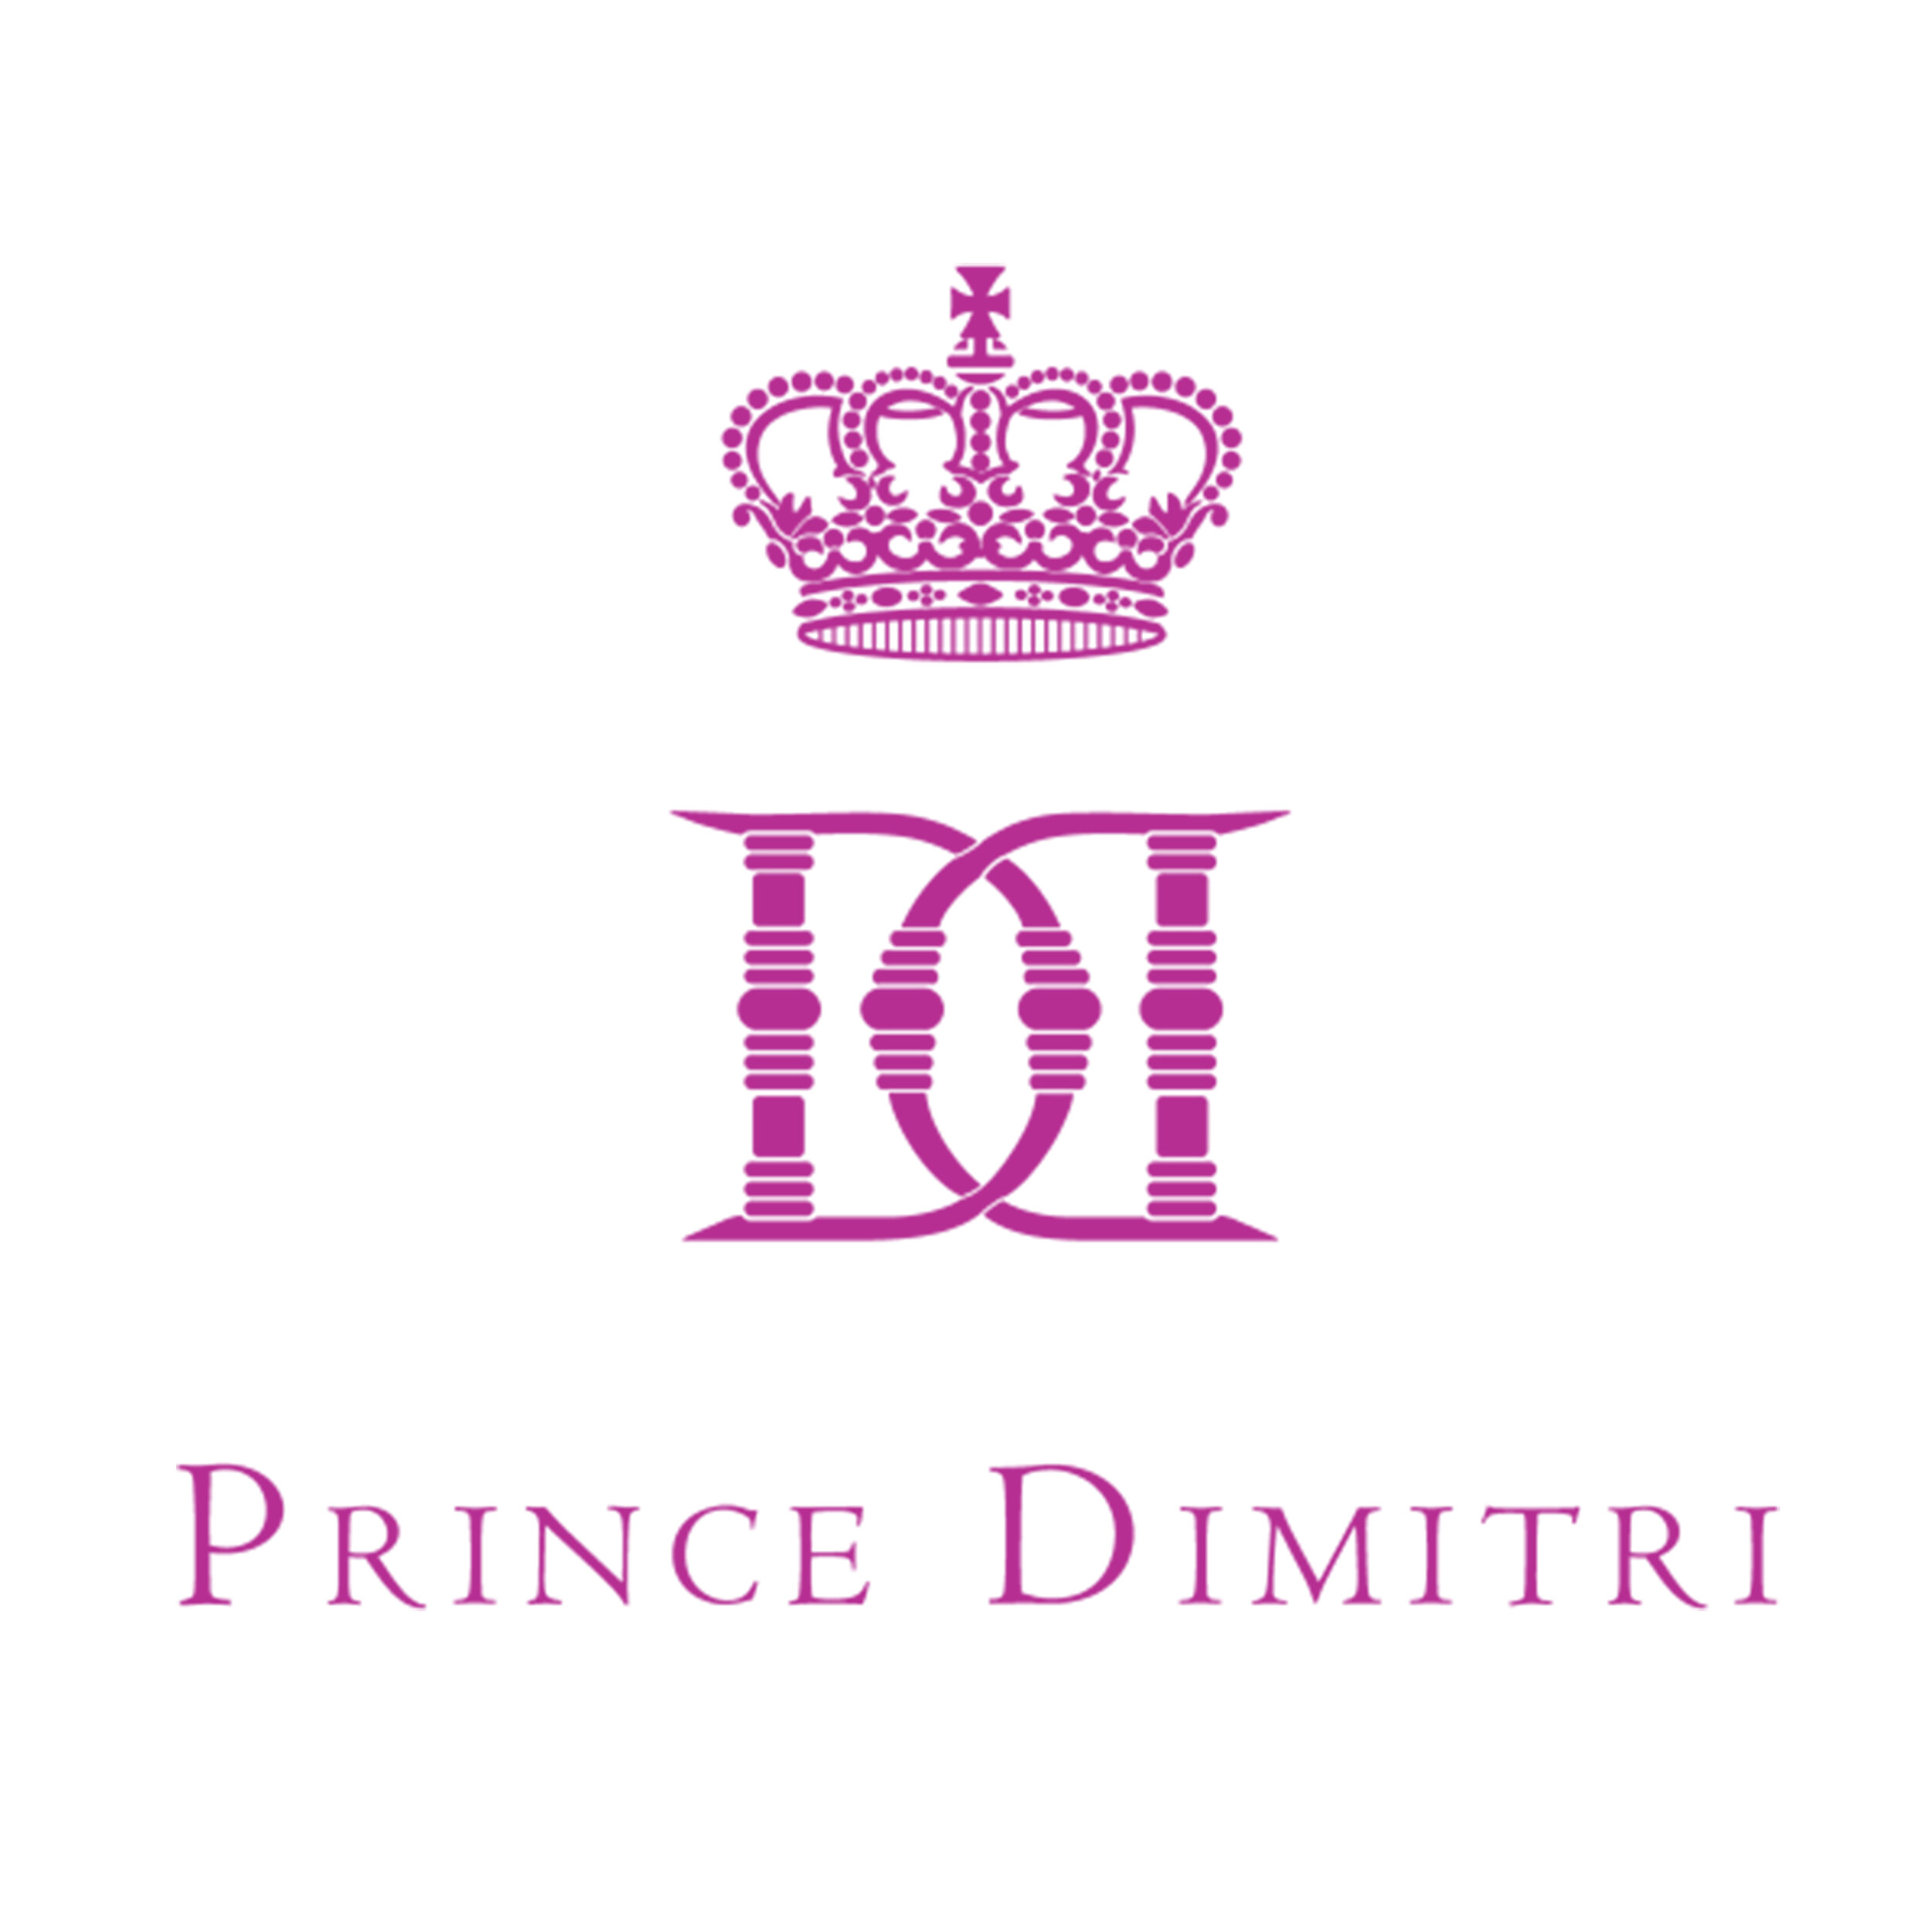 prince dimitri fitted.jpg